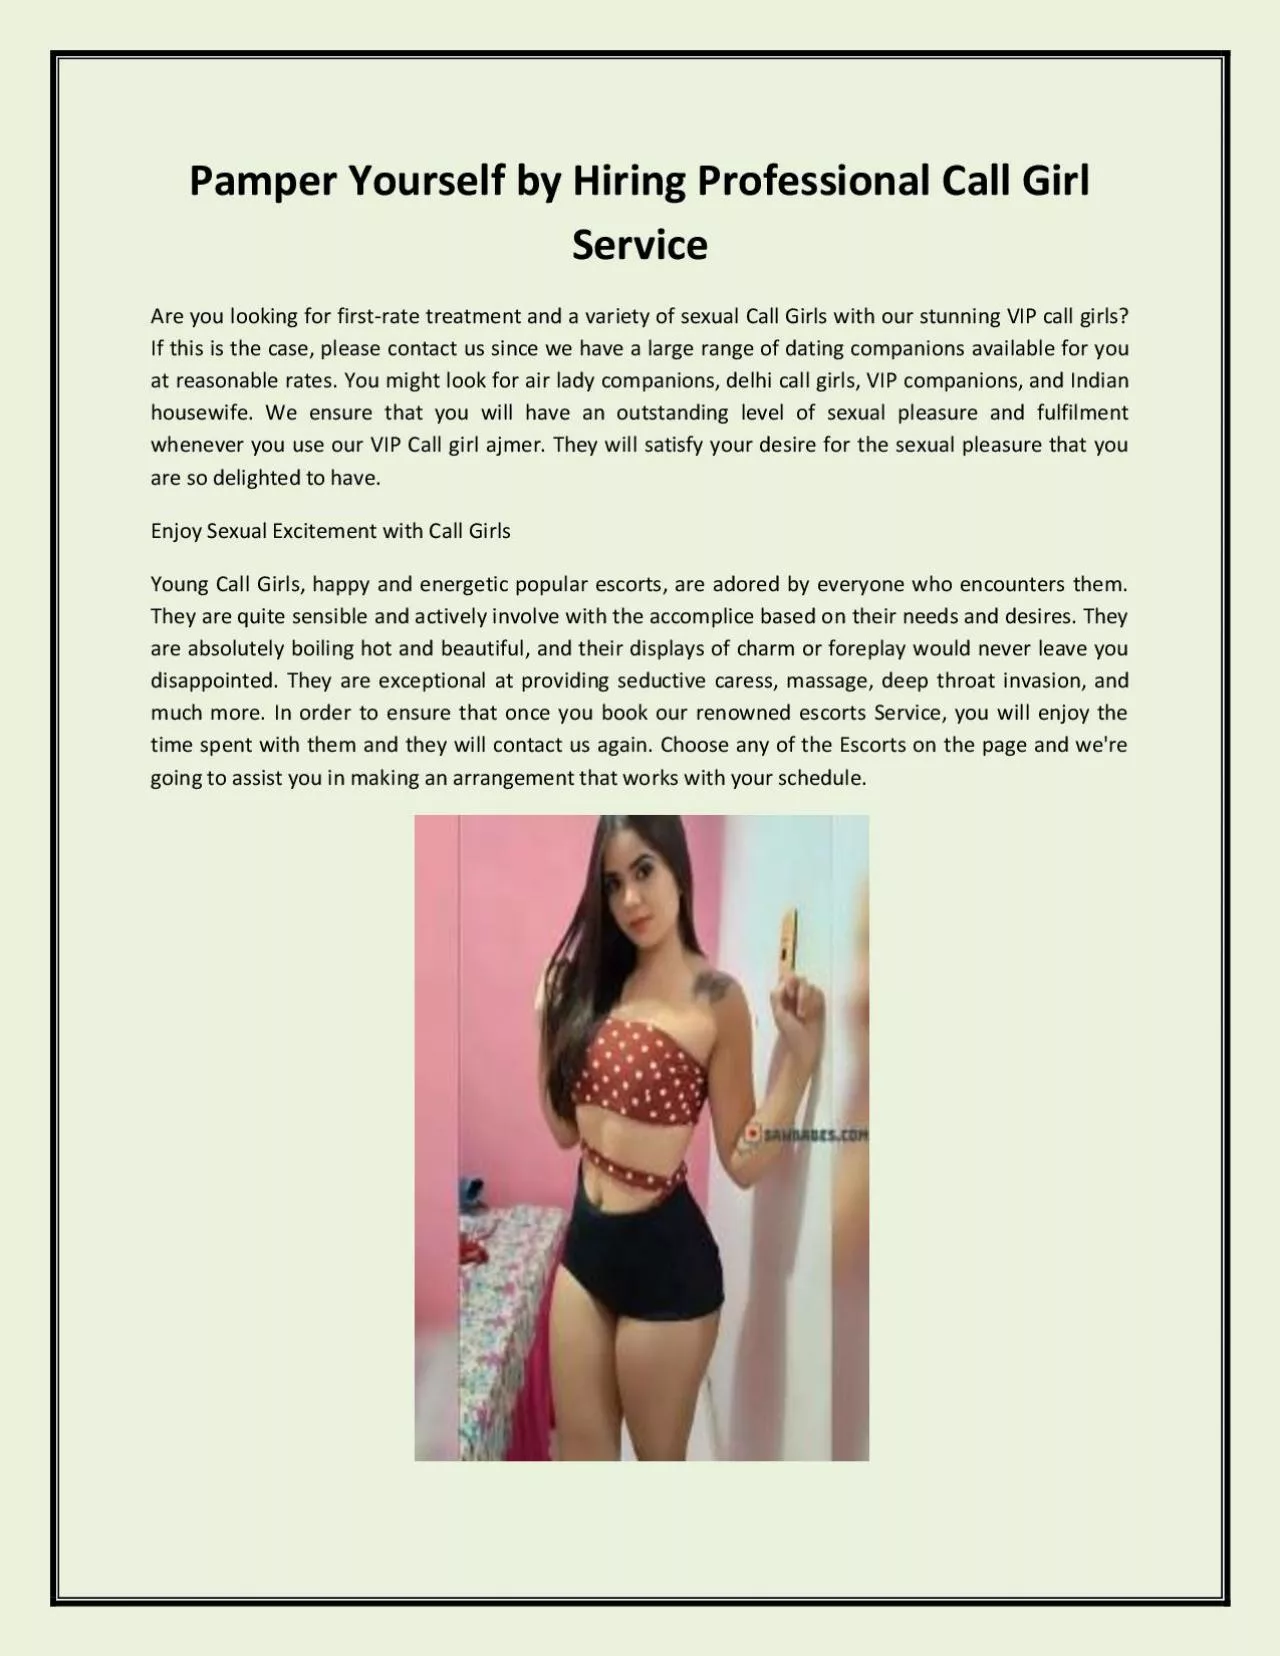 Pamper Yourself by Hiring Professional Call Girl Service